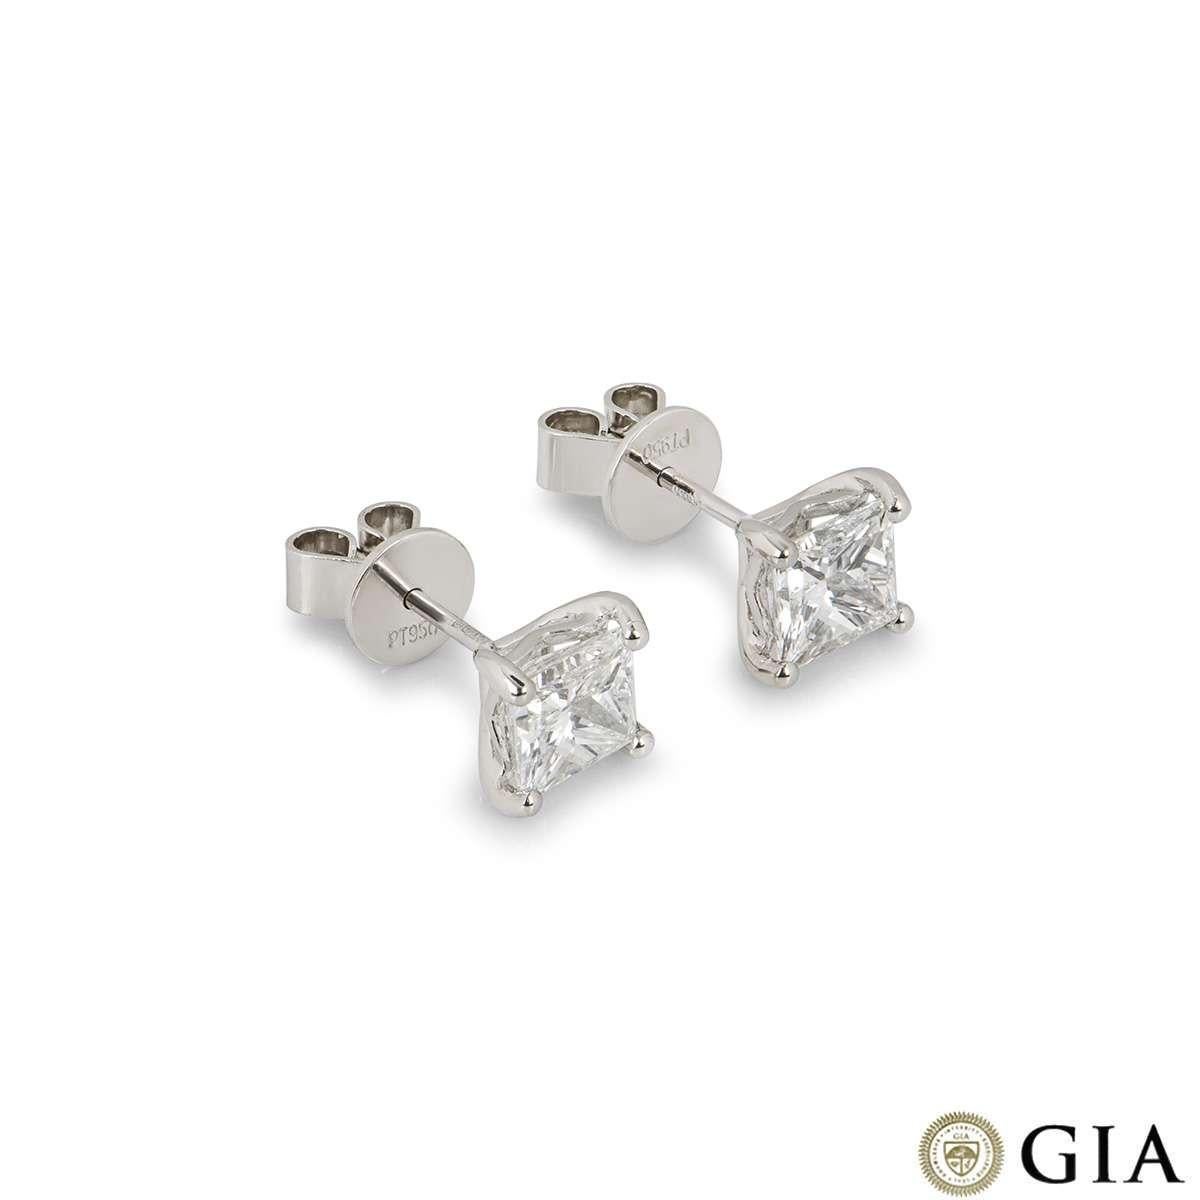 A stunning pair of platinum diamond earrings. Each earring has a princess cut diamond in a classic 4 claw setting. Each diamond weighs 1.20ct, one diamond is G colour and the other is F colour, both diamonds are VS1 clarity. The earrings feature